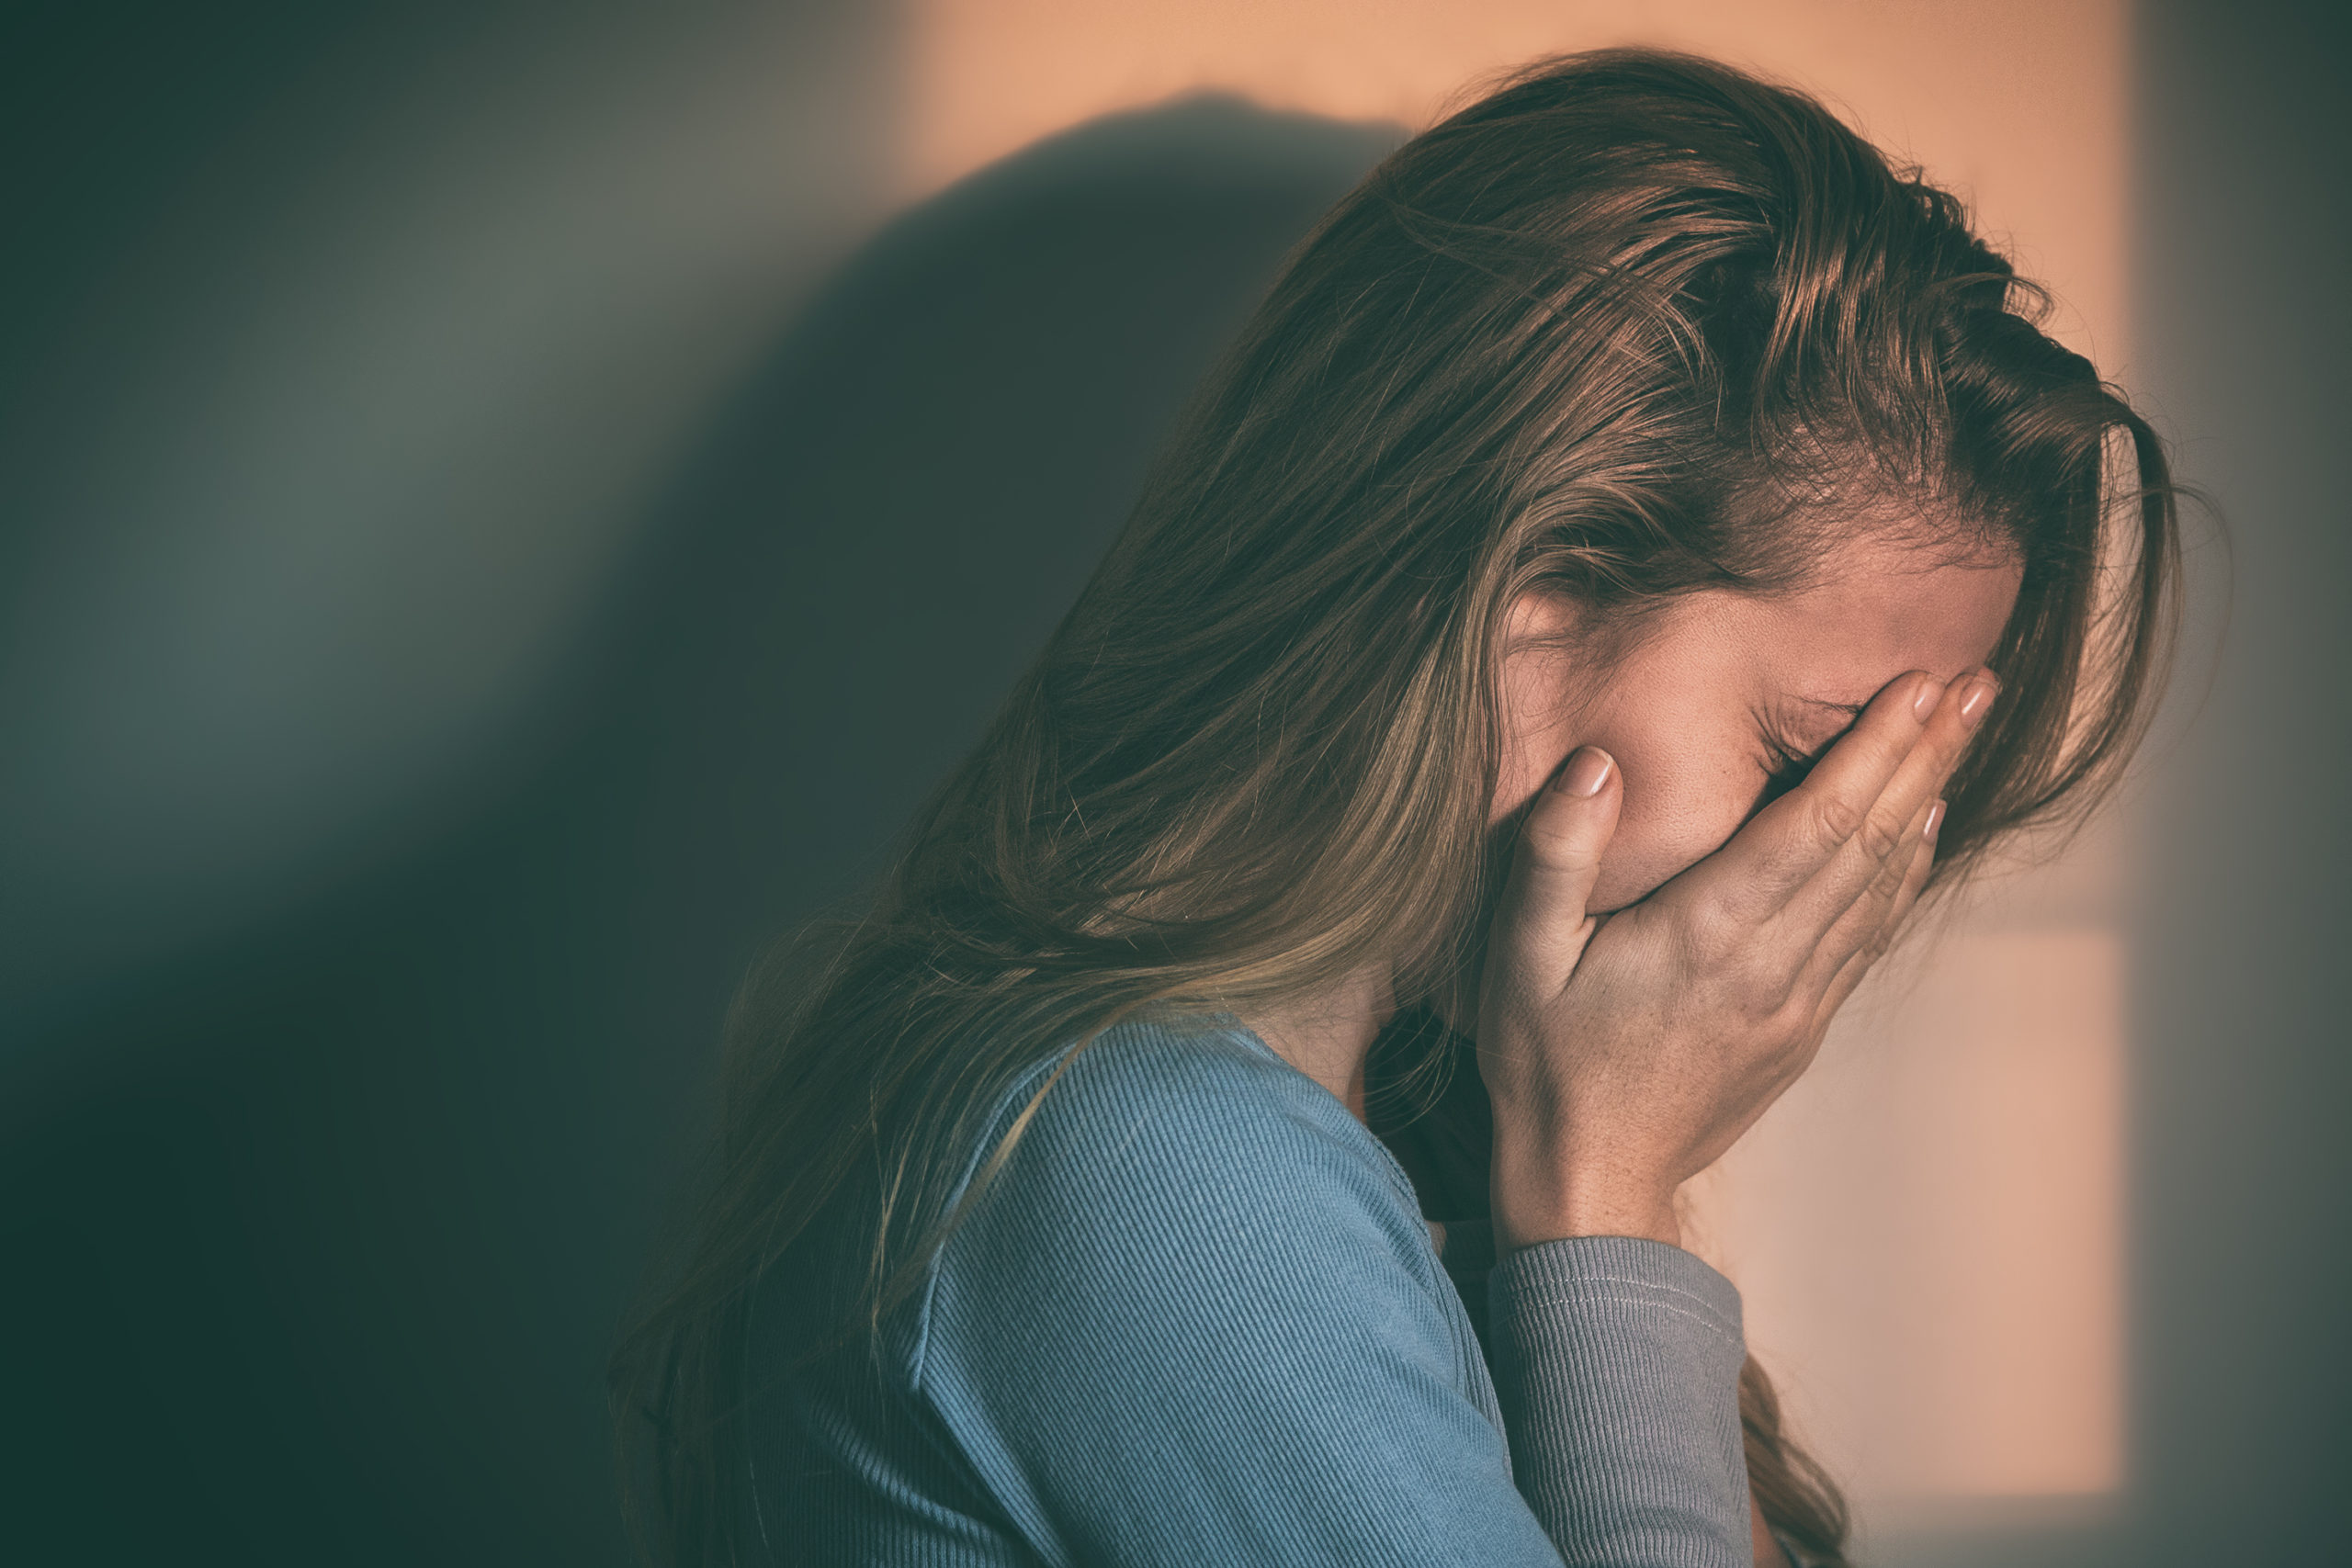 What are the Signs of Depression for Women?